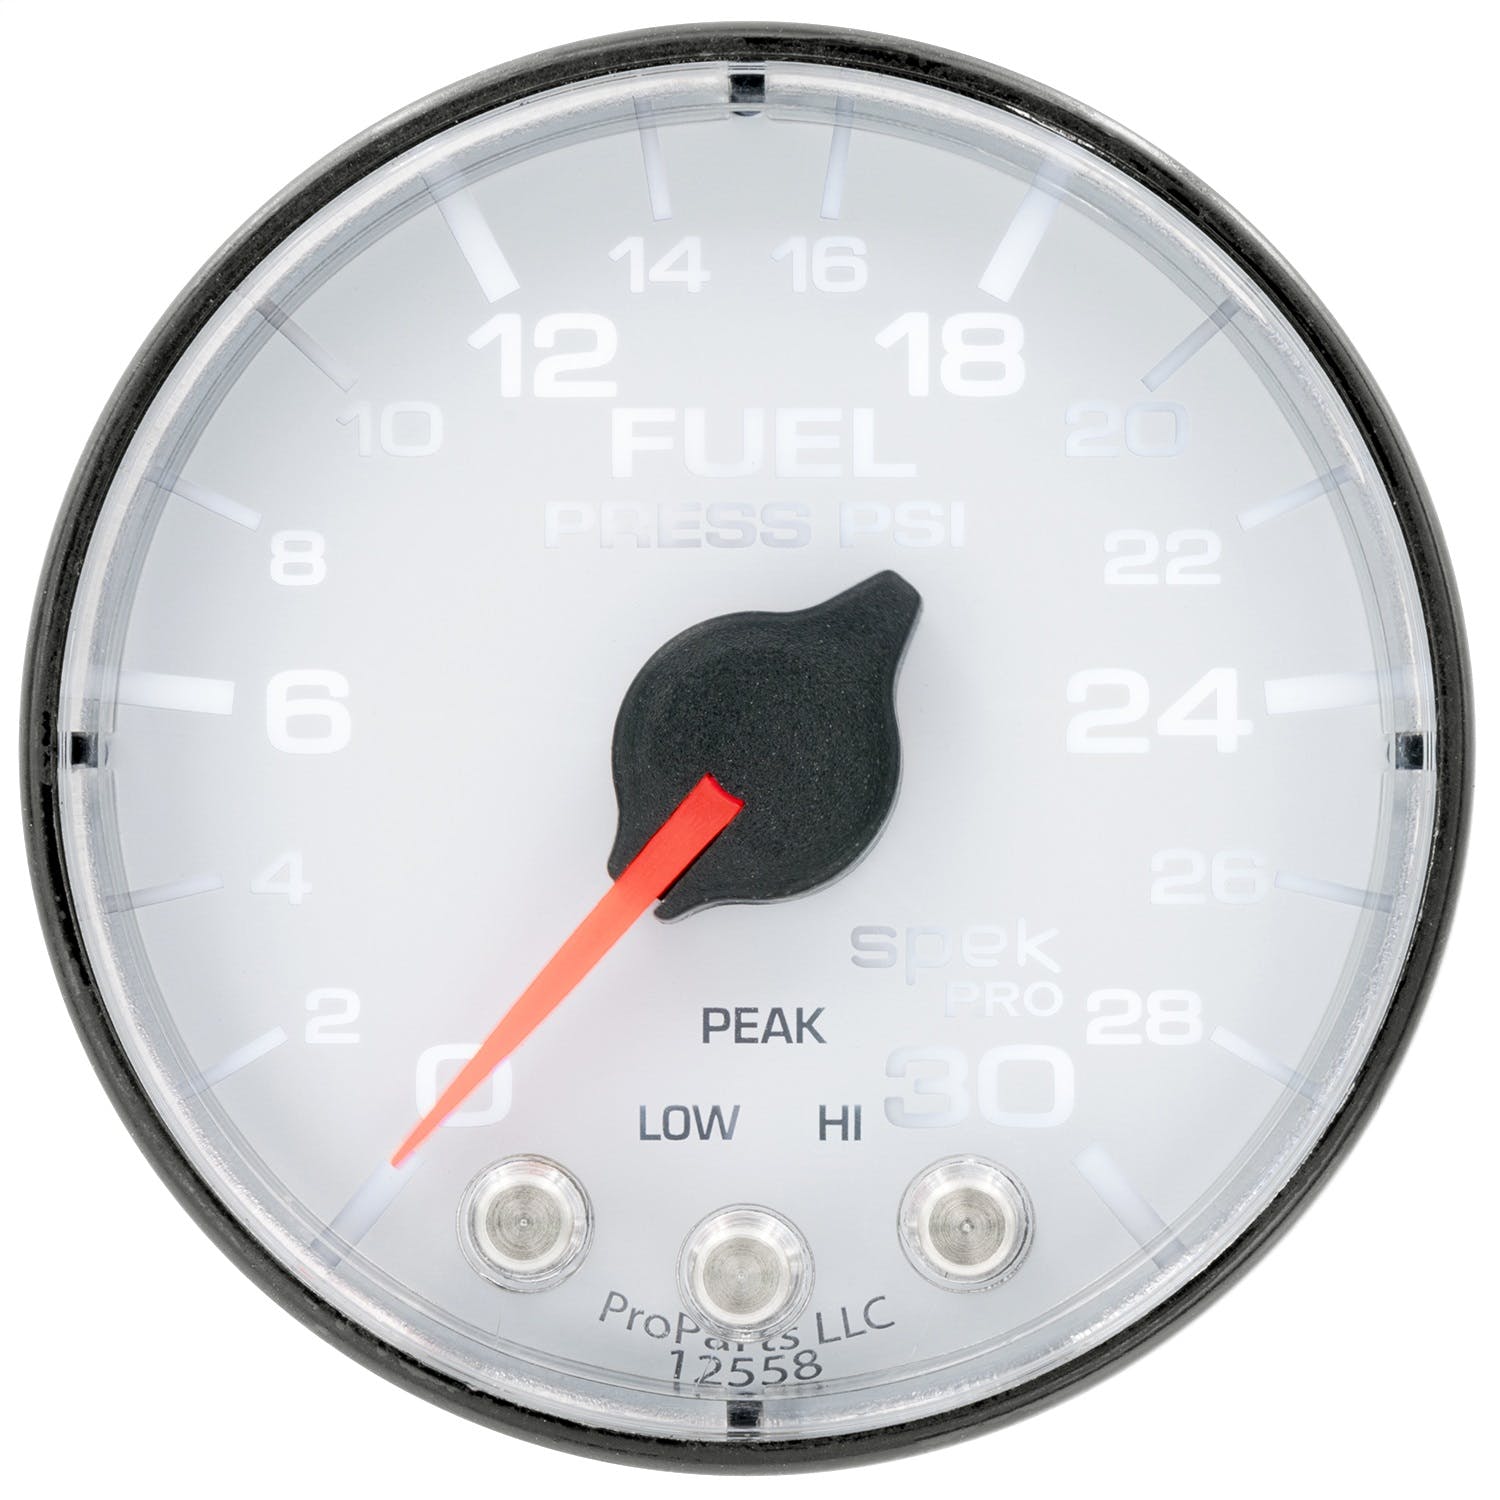 AutoMeter Products P316128 Fuel Pressure Gauge, 2 116, 30PSI, Stepper Motor White